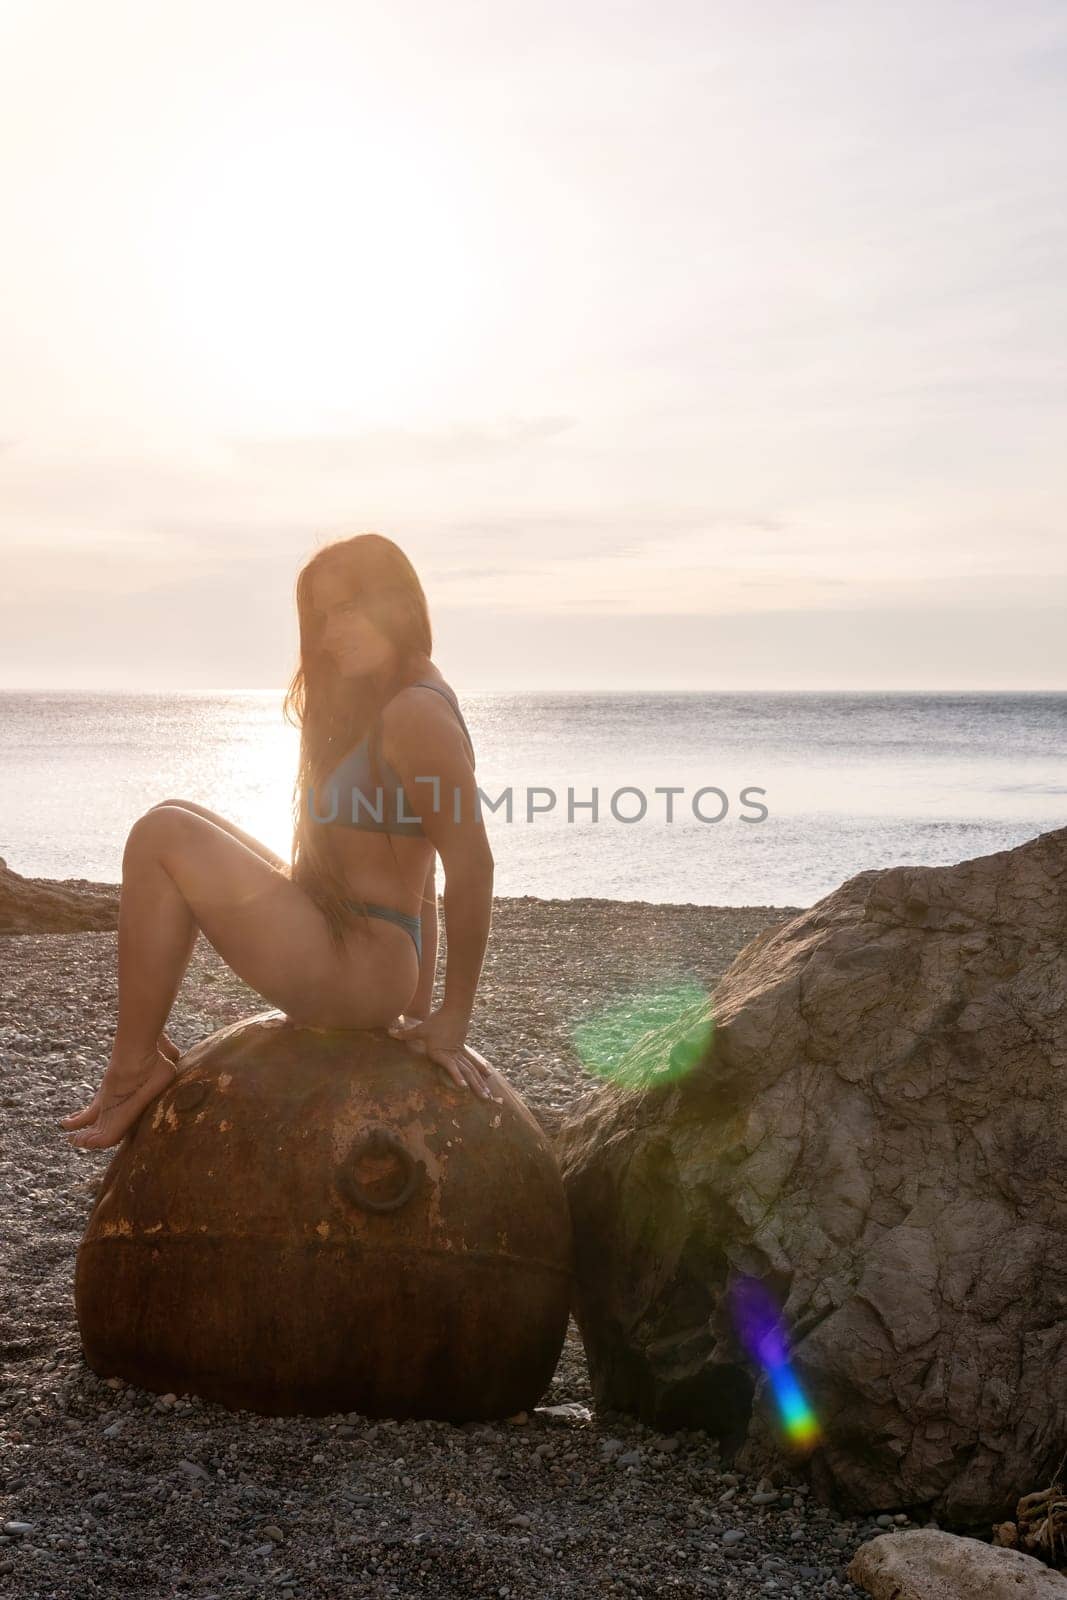 Woman summer travel sea. A happy tourist enjoys taking pictures of her travels, posing by an old, rusty sea mine on a beach surrounded by volcanic mountains, sharing travel adventure journey by panophotograph